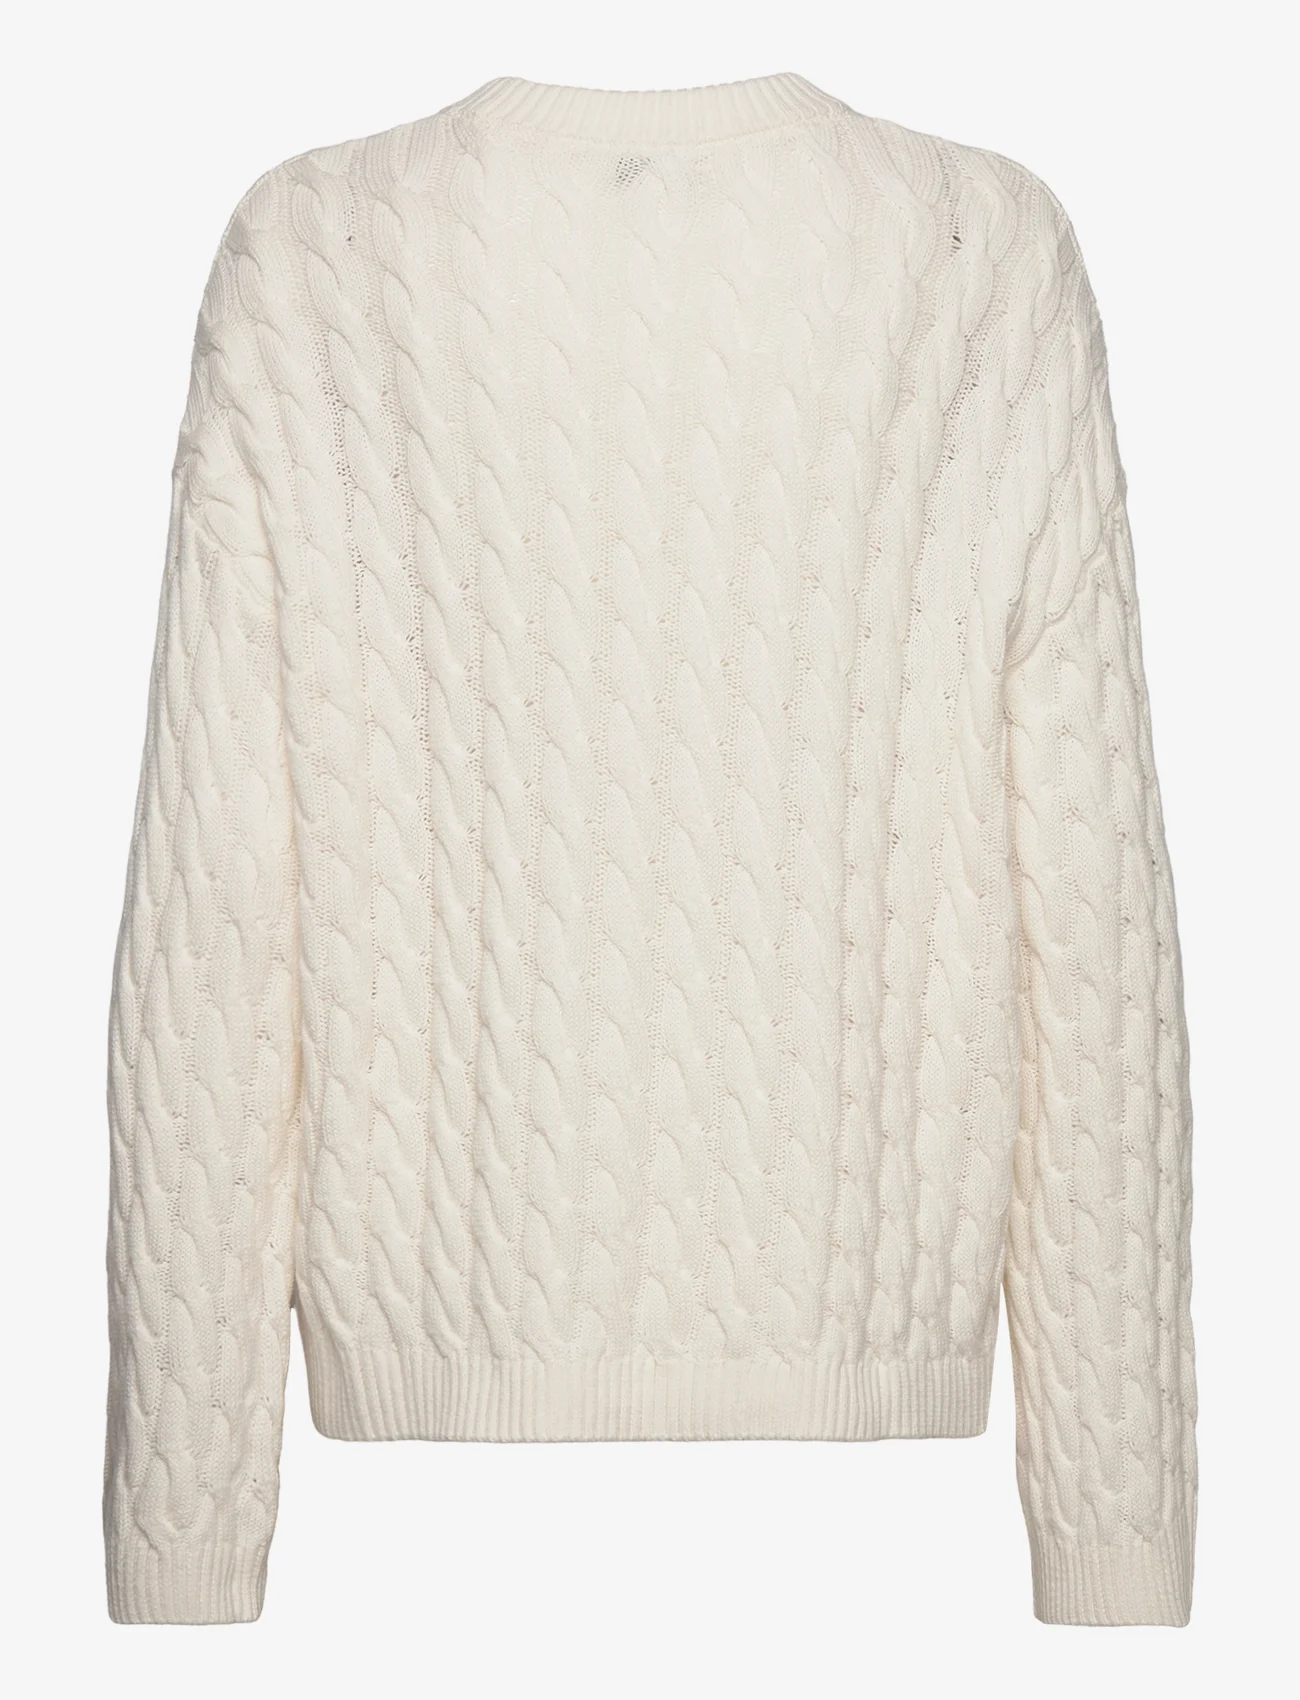 Julie Josephine - Cable Knit Sweater - jumpers - white - 1